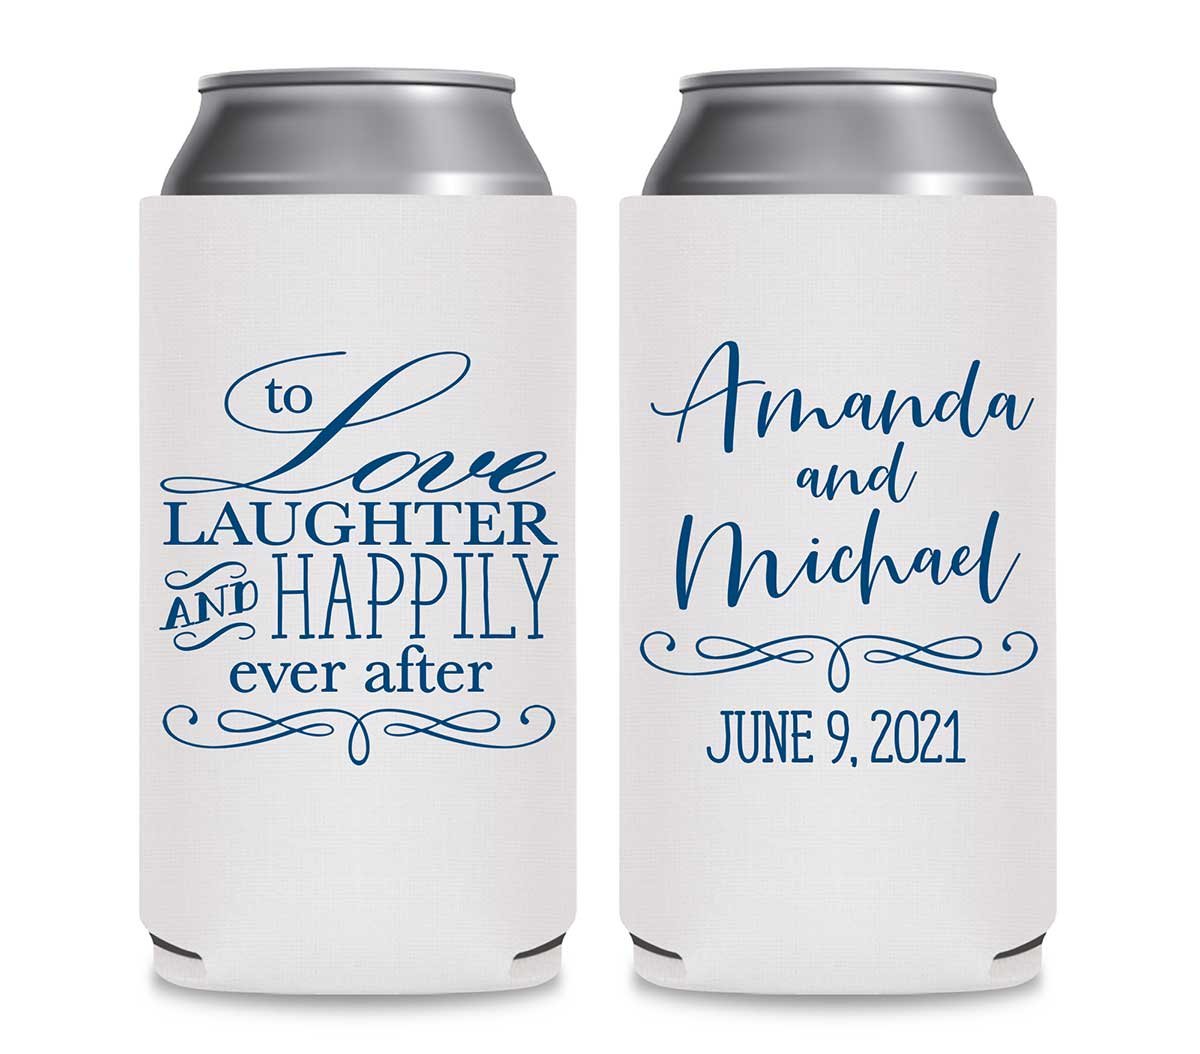 To Love Laughter & Happily Ever After 2A Foldable 12 oz Slim Can Koozies Wedding Gifts for Guests